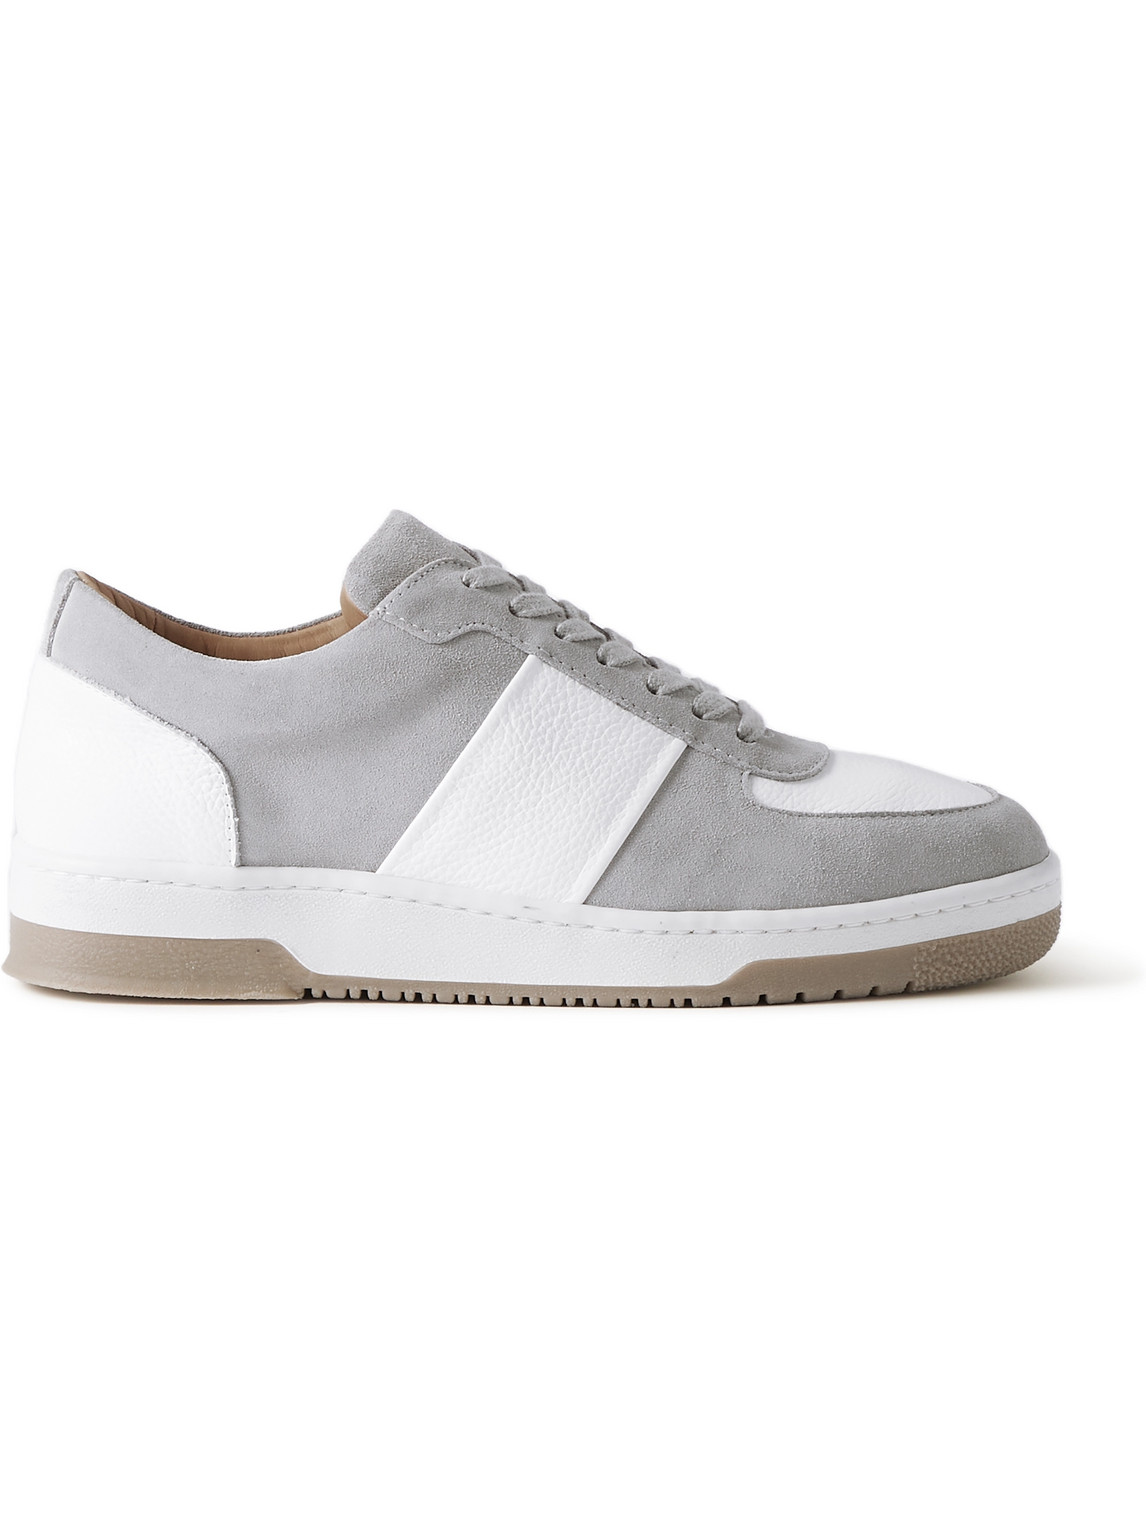 Mr P Atticus Suede And Full-grain Leather Sneakers In Gray